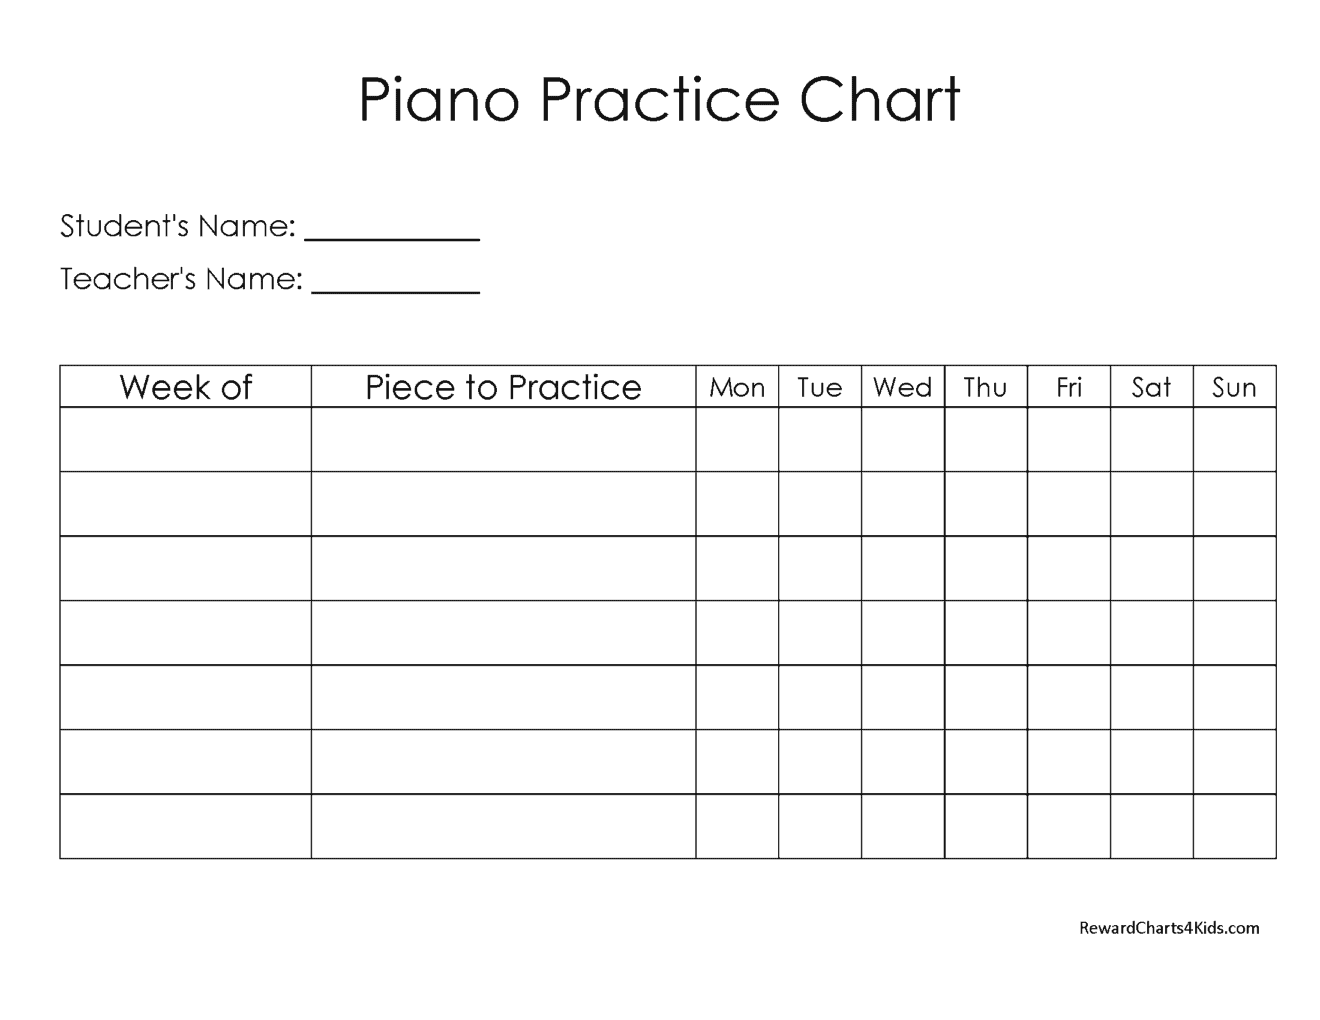 Free Piano Practice Chart Customize Online then Print at Home